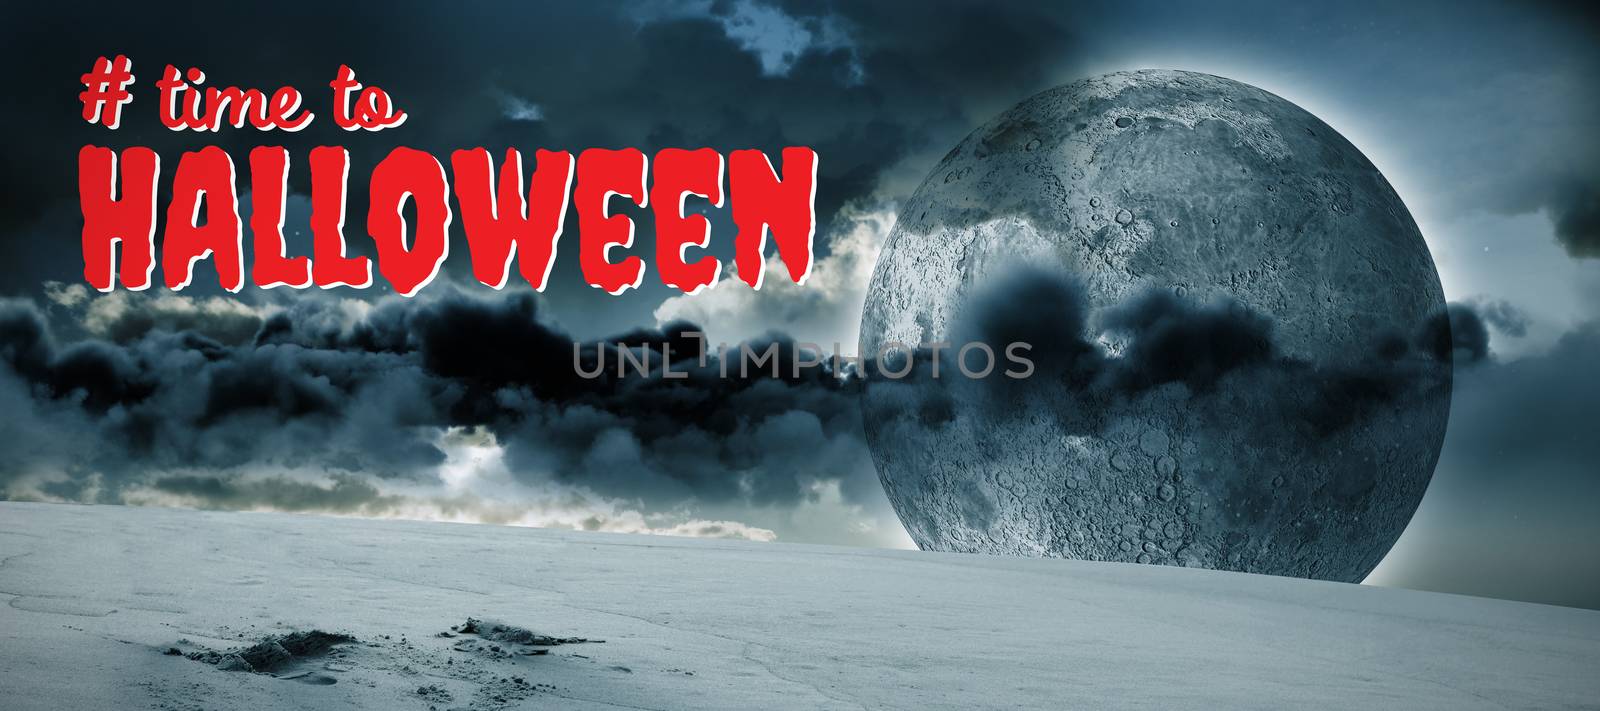 Digital composite image of time to Halloween text against view of landscape and moon